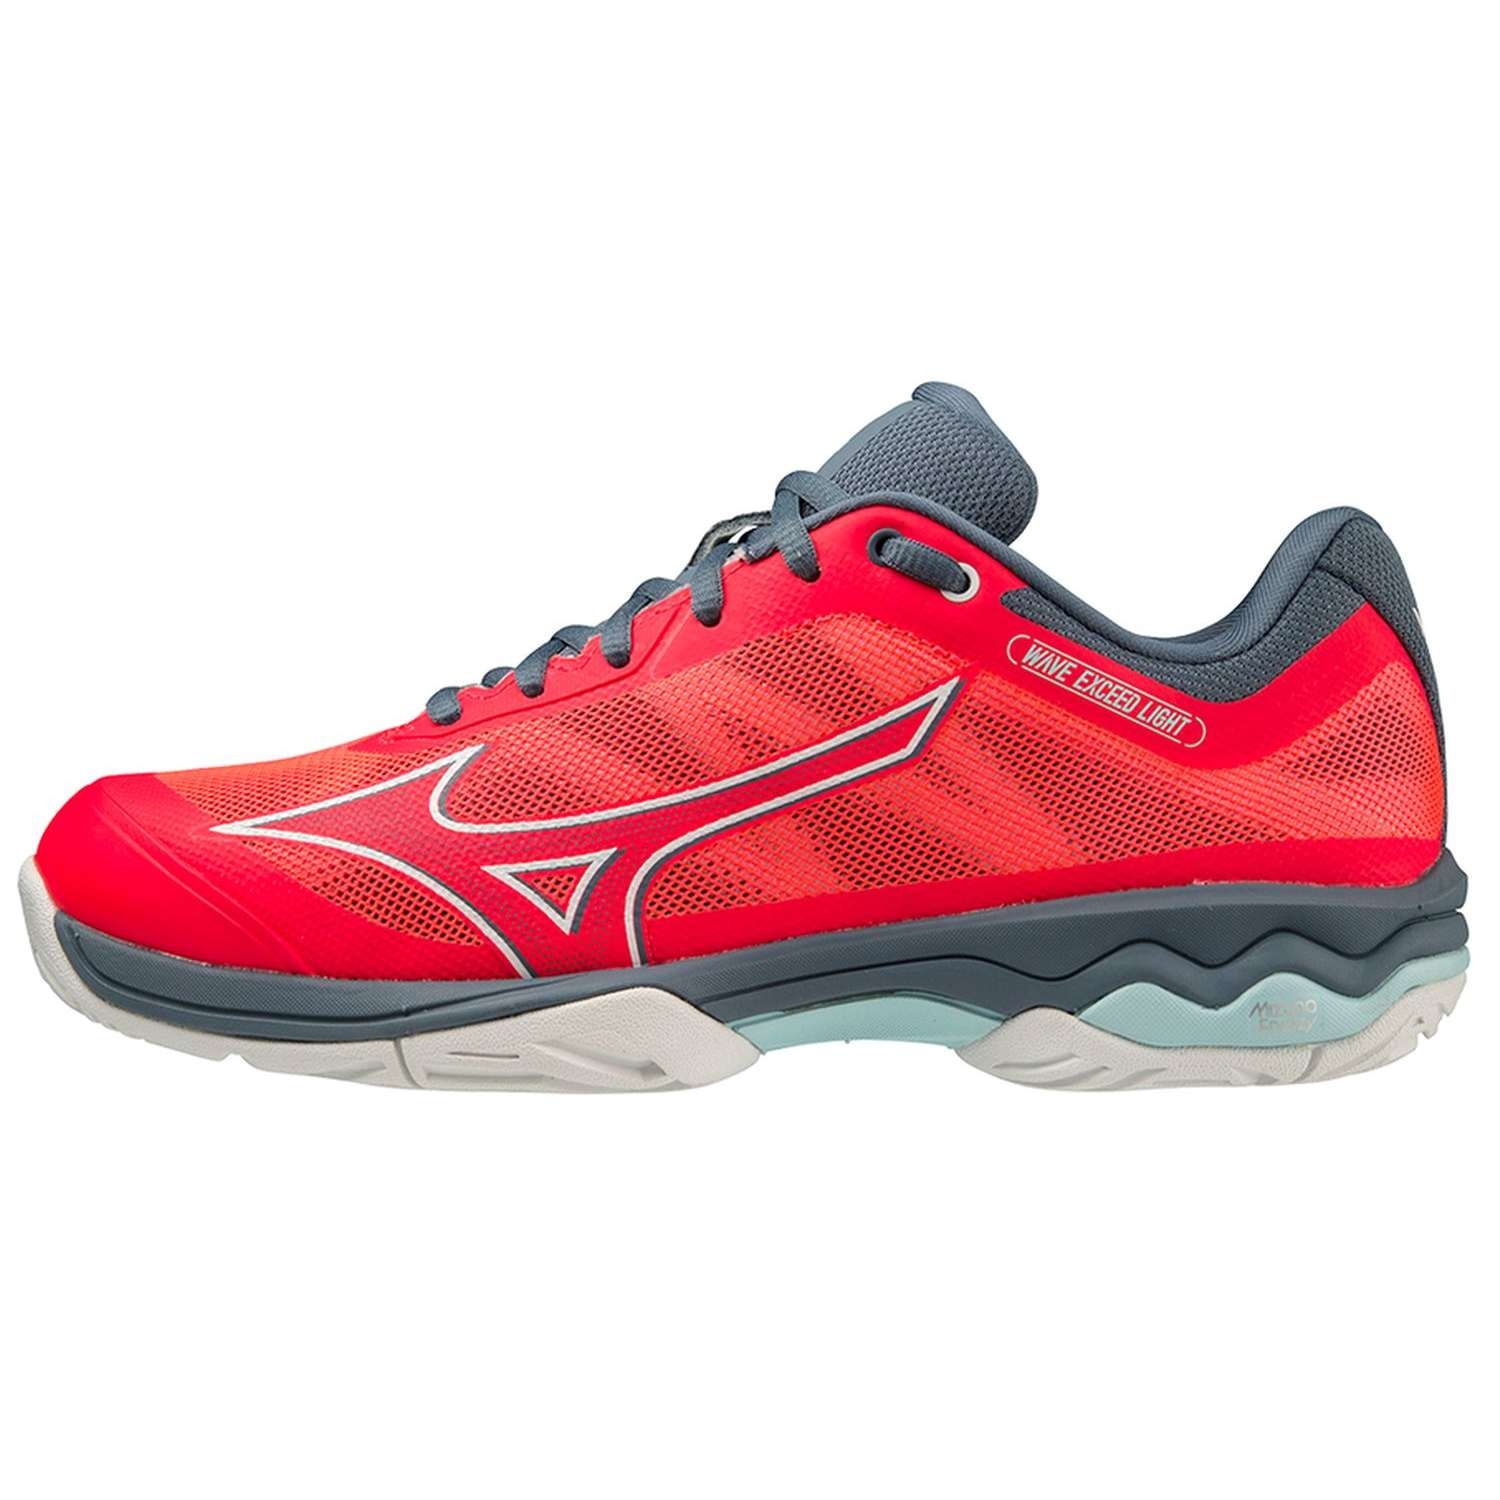 Mizuno Wave Exceed Light Fiery Coral